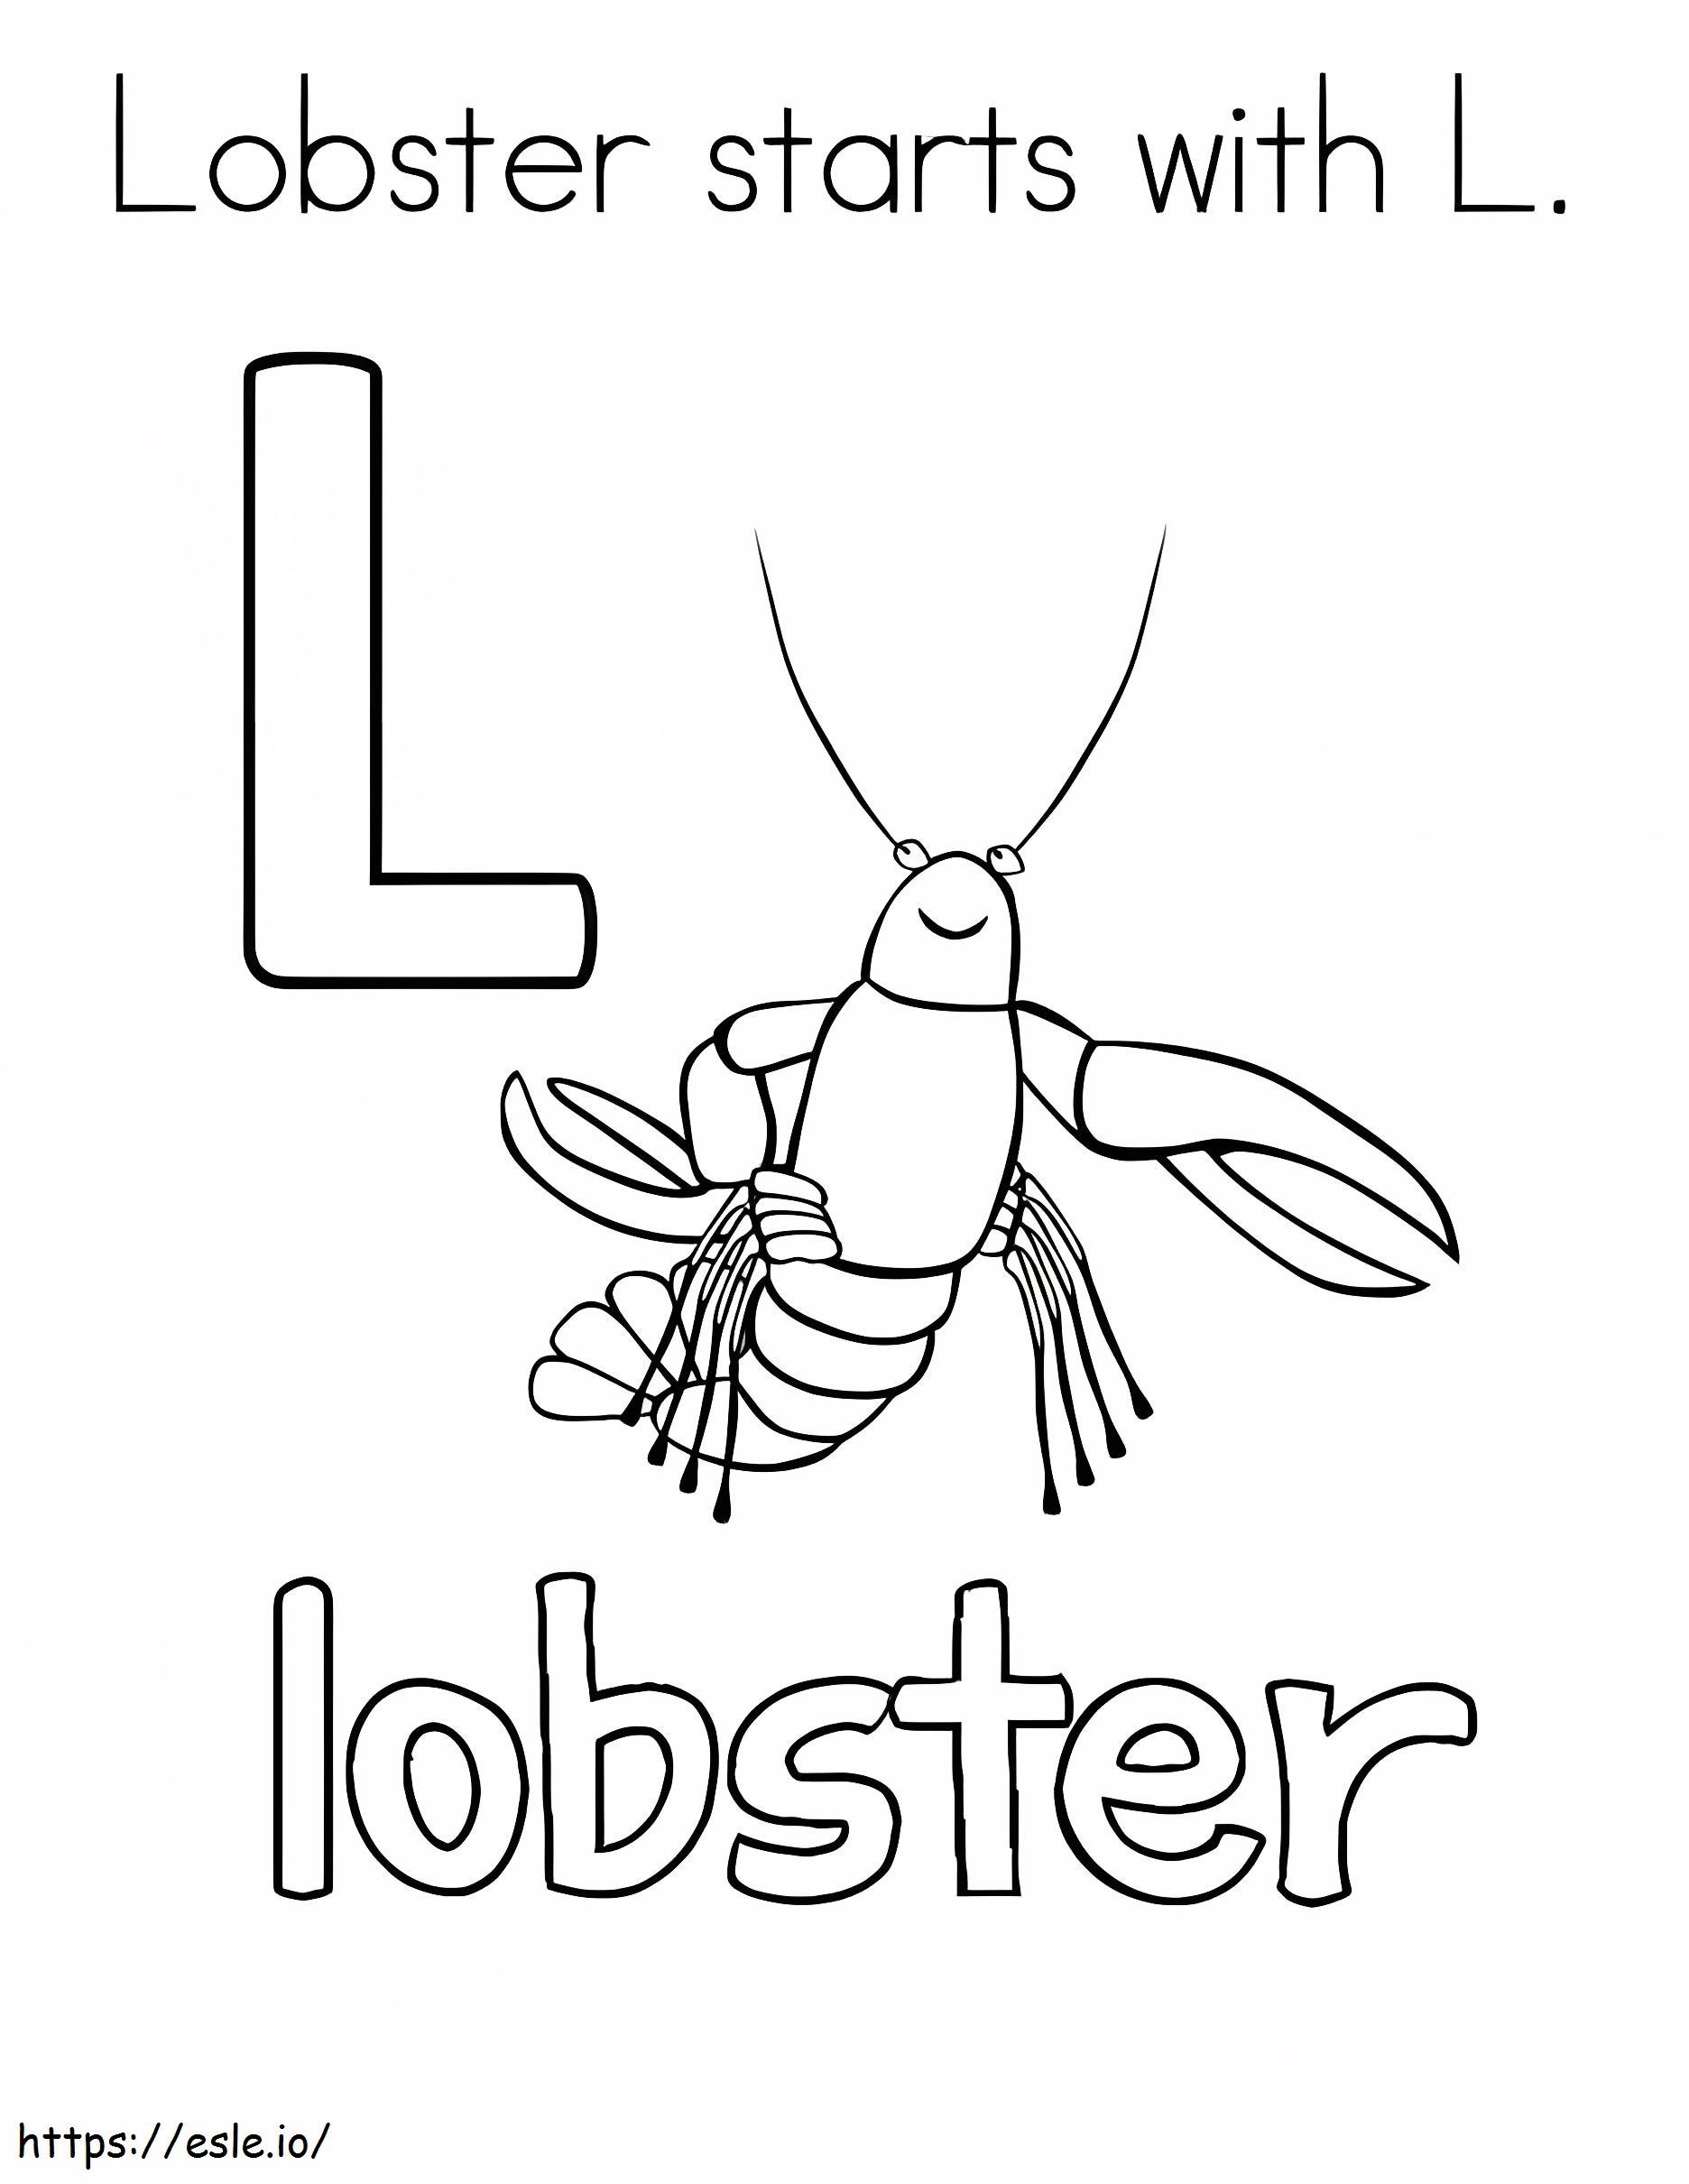 The Lobster Starts With L coloring page